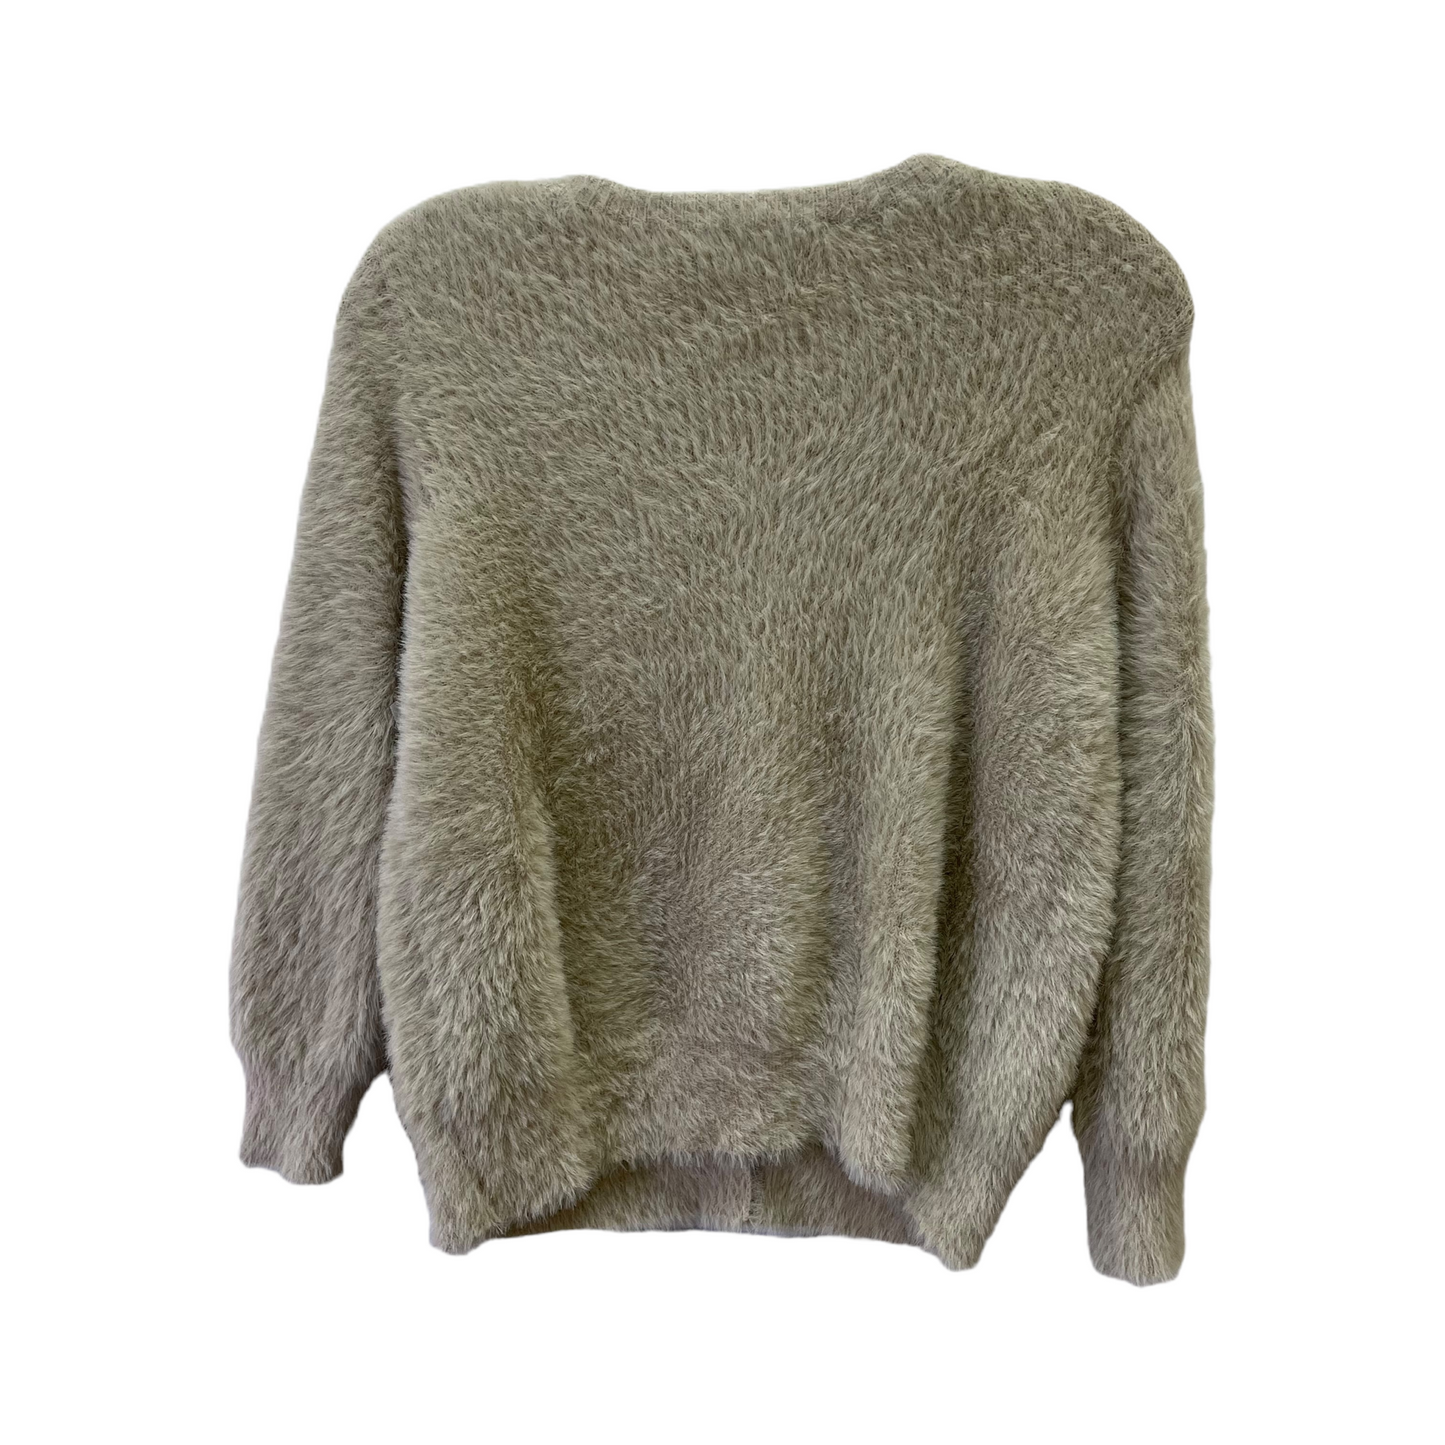 Taupe Sweater By Zara, Size: S